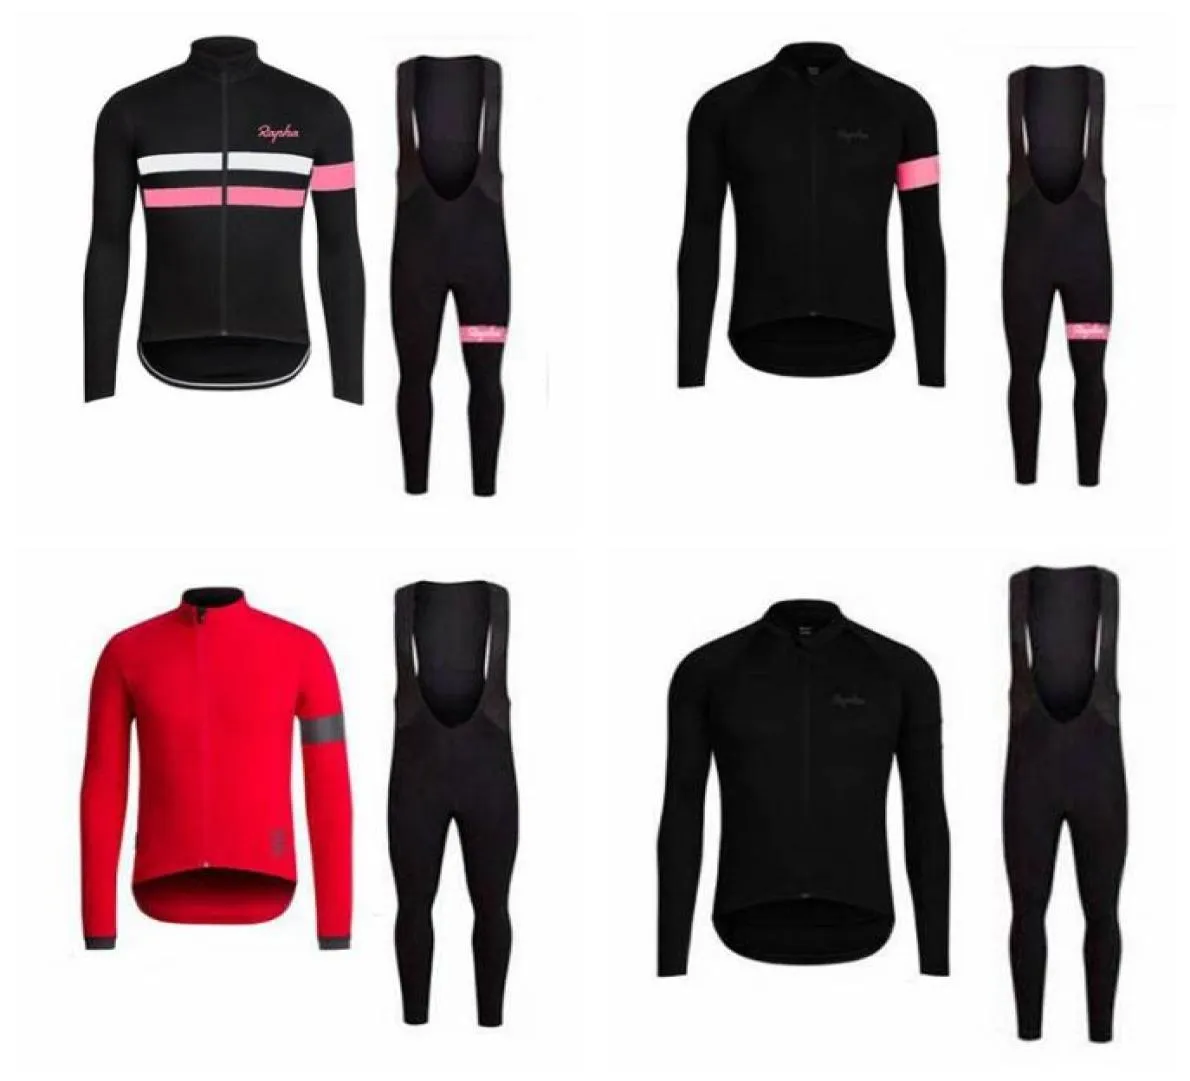 team custom made Autumn spring Cycling long Sleeves jersey bib pants sets Comfortable outdoor sports Jersey suit Y210315116147015